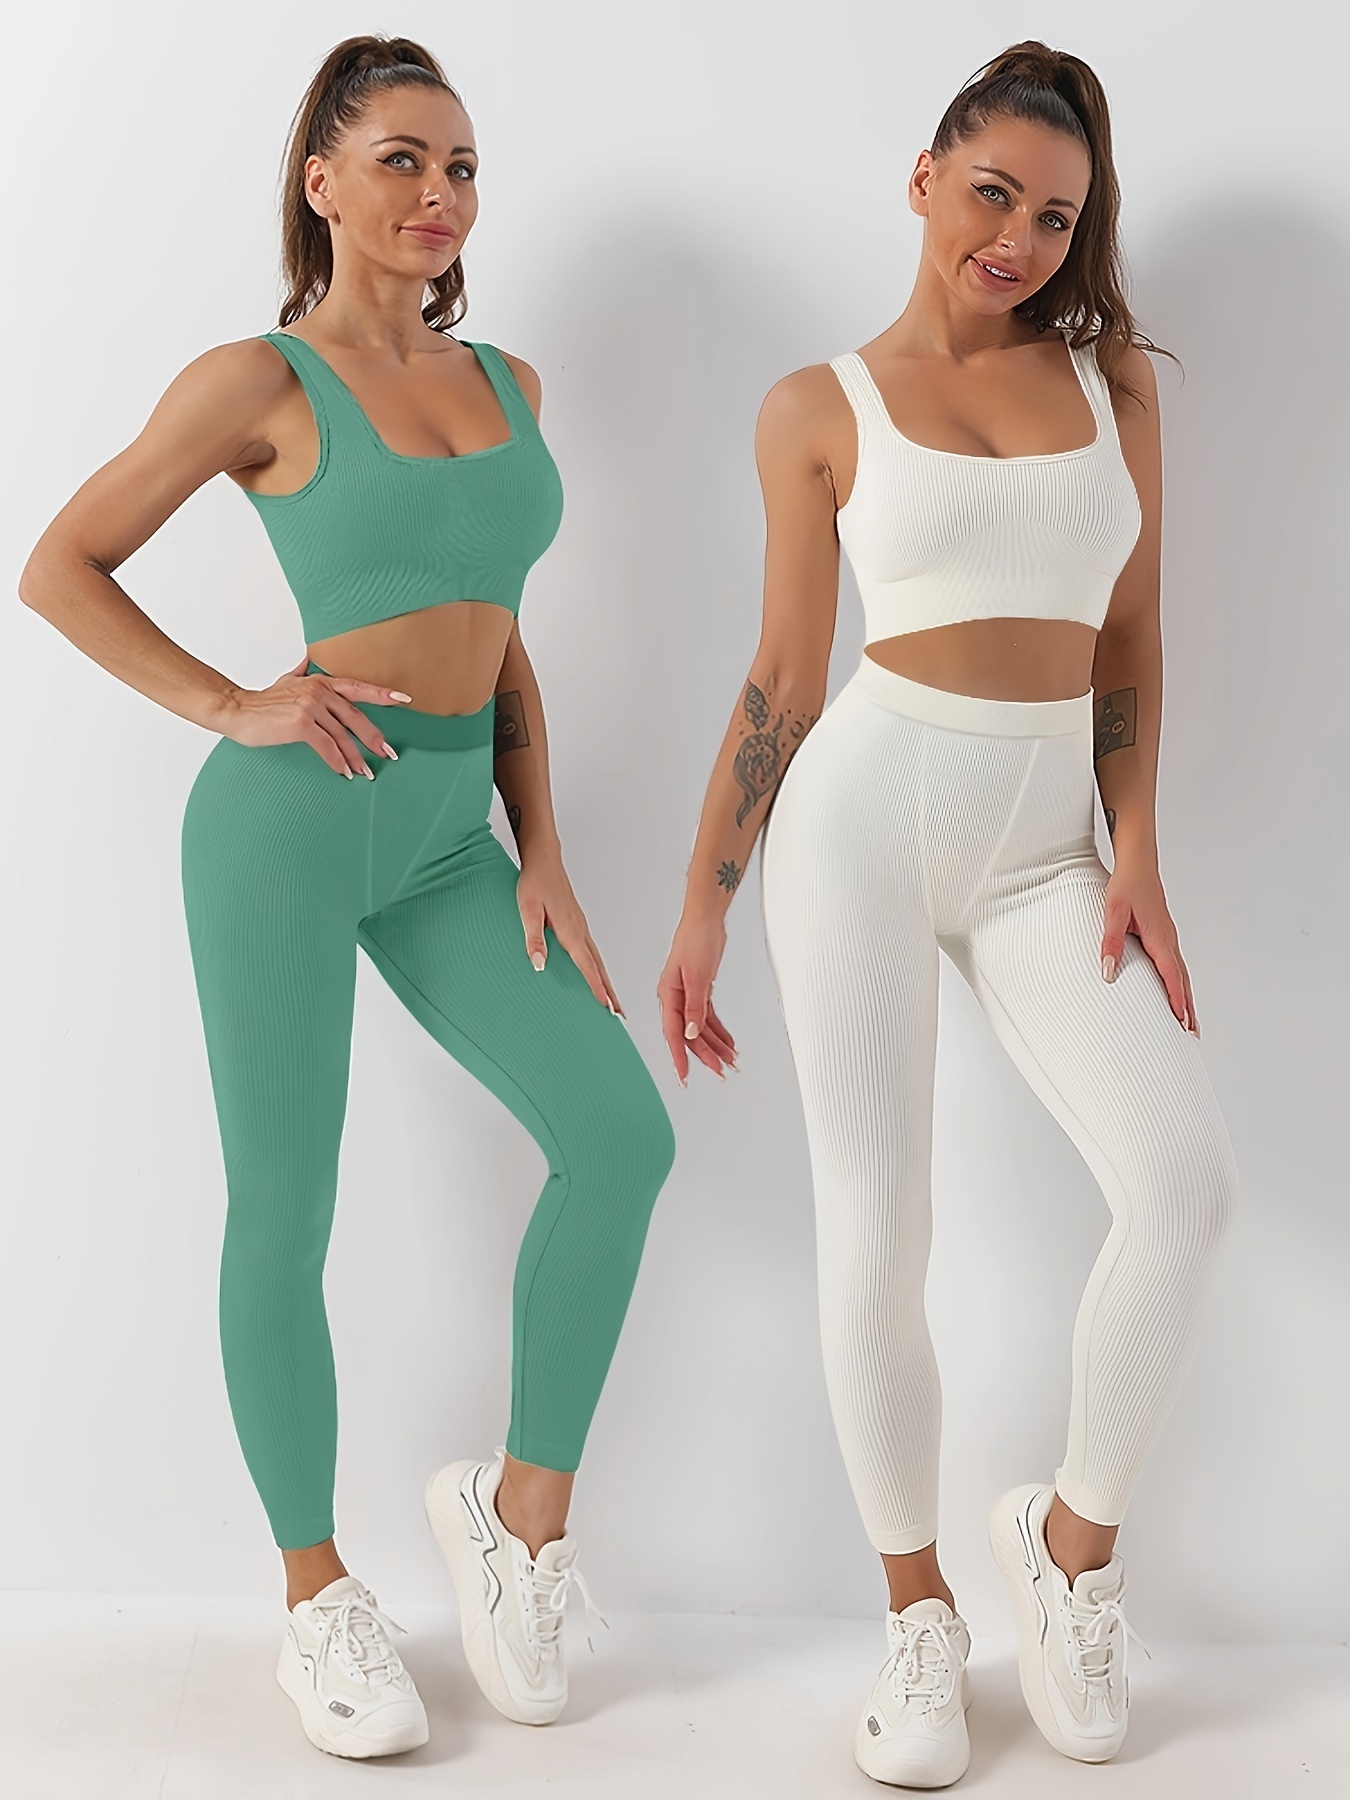 Womens' Workout Sets 2 Piece Gym Outfits for Seamless Yoga (Green